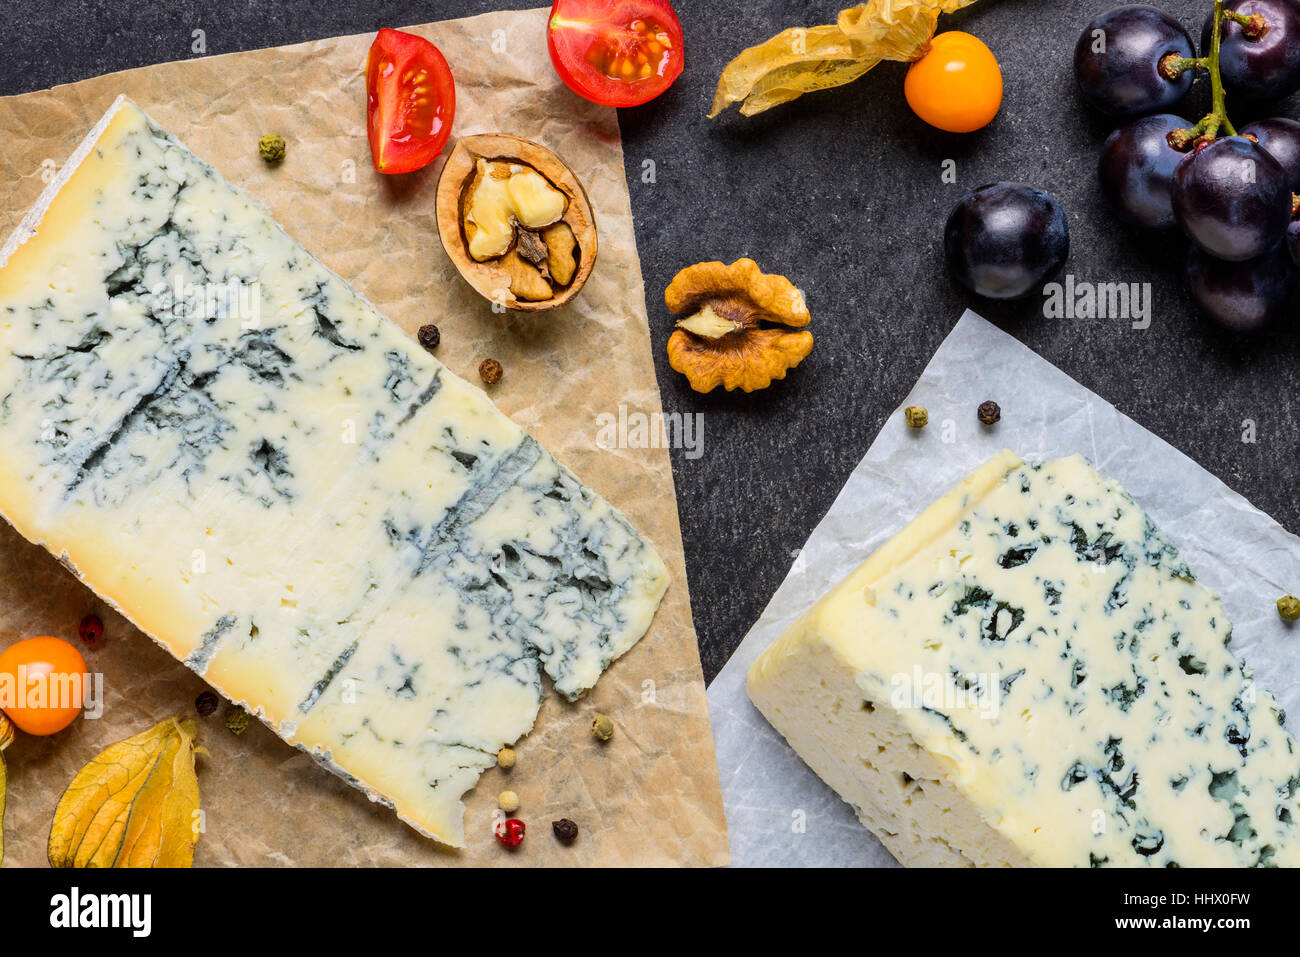 Danish Blue Mold Cheese with Poha Fruits, Grapes and Tomato Stock Photo